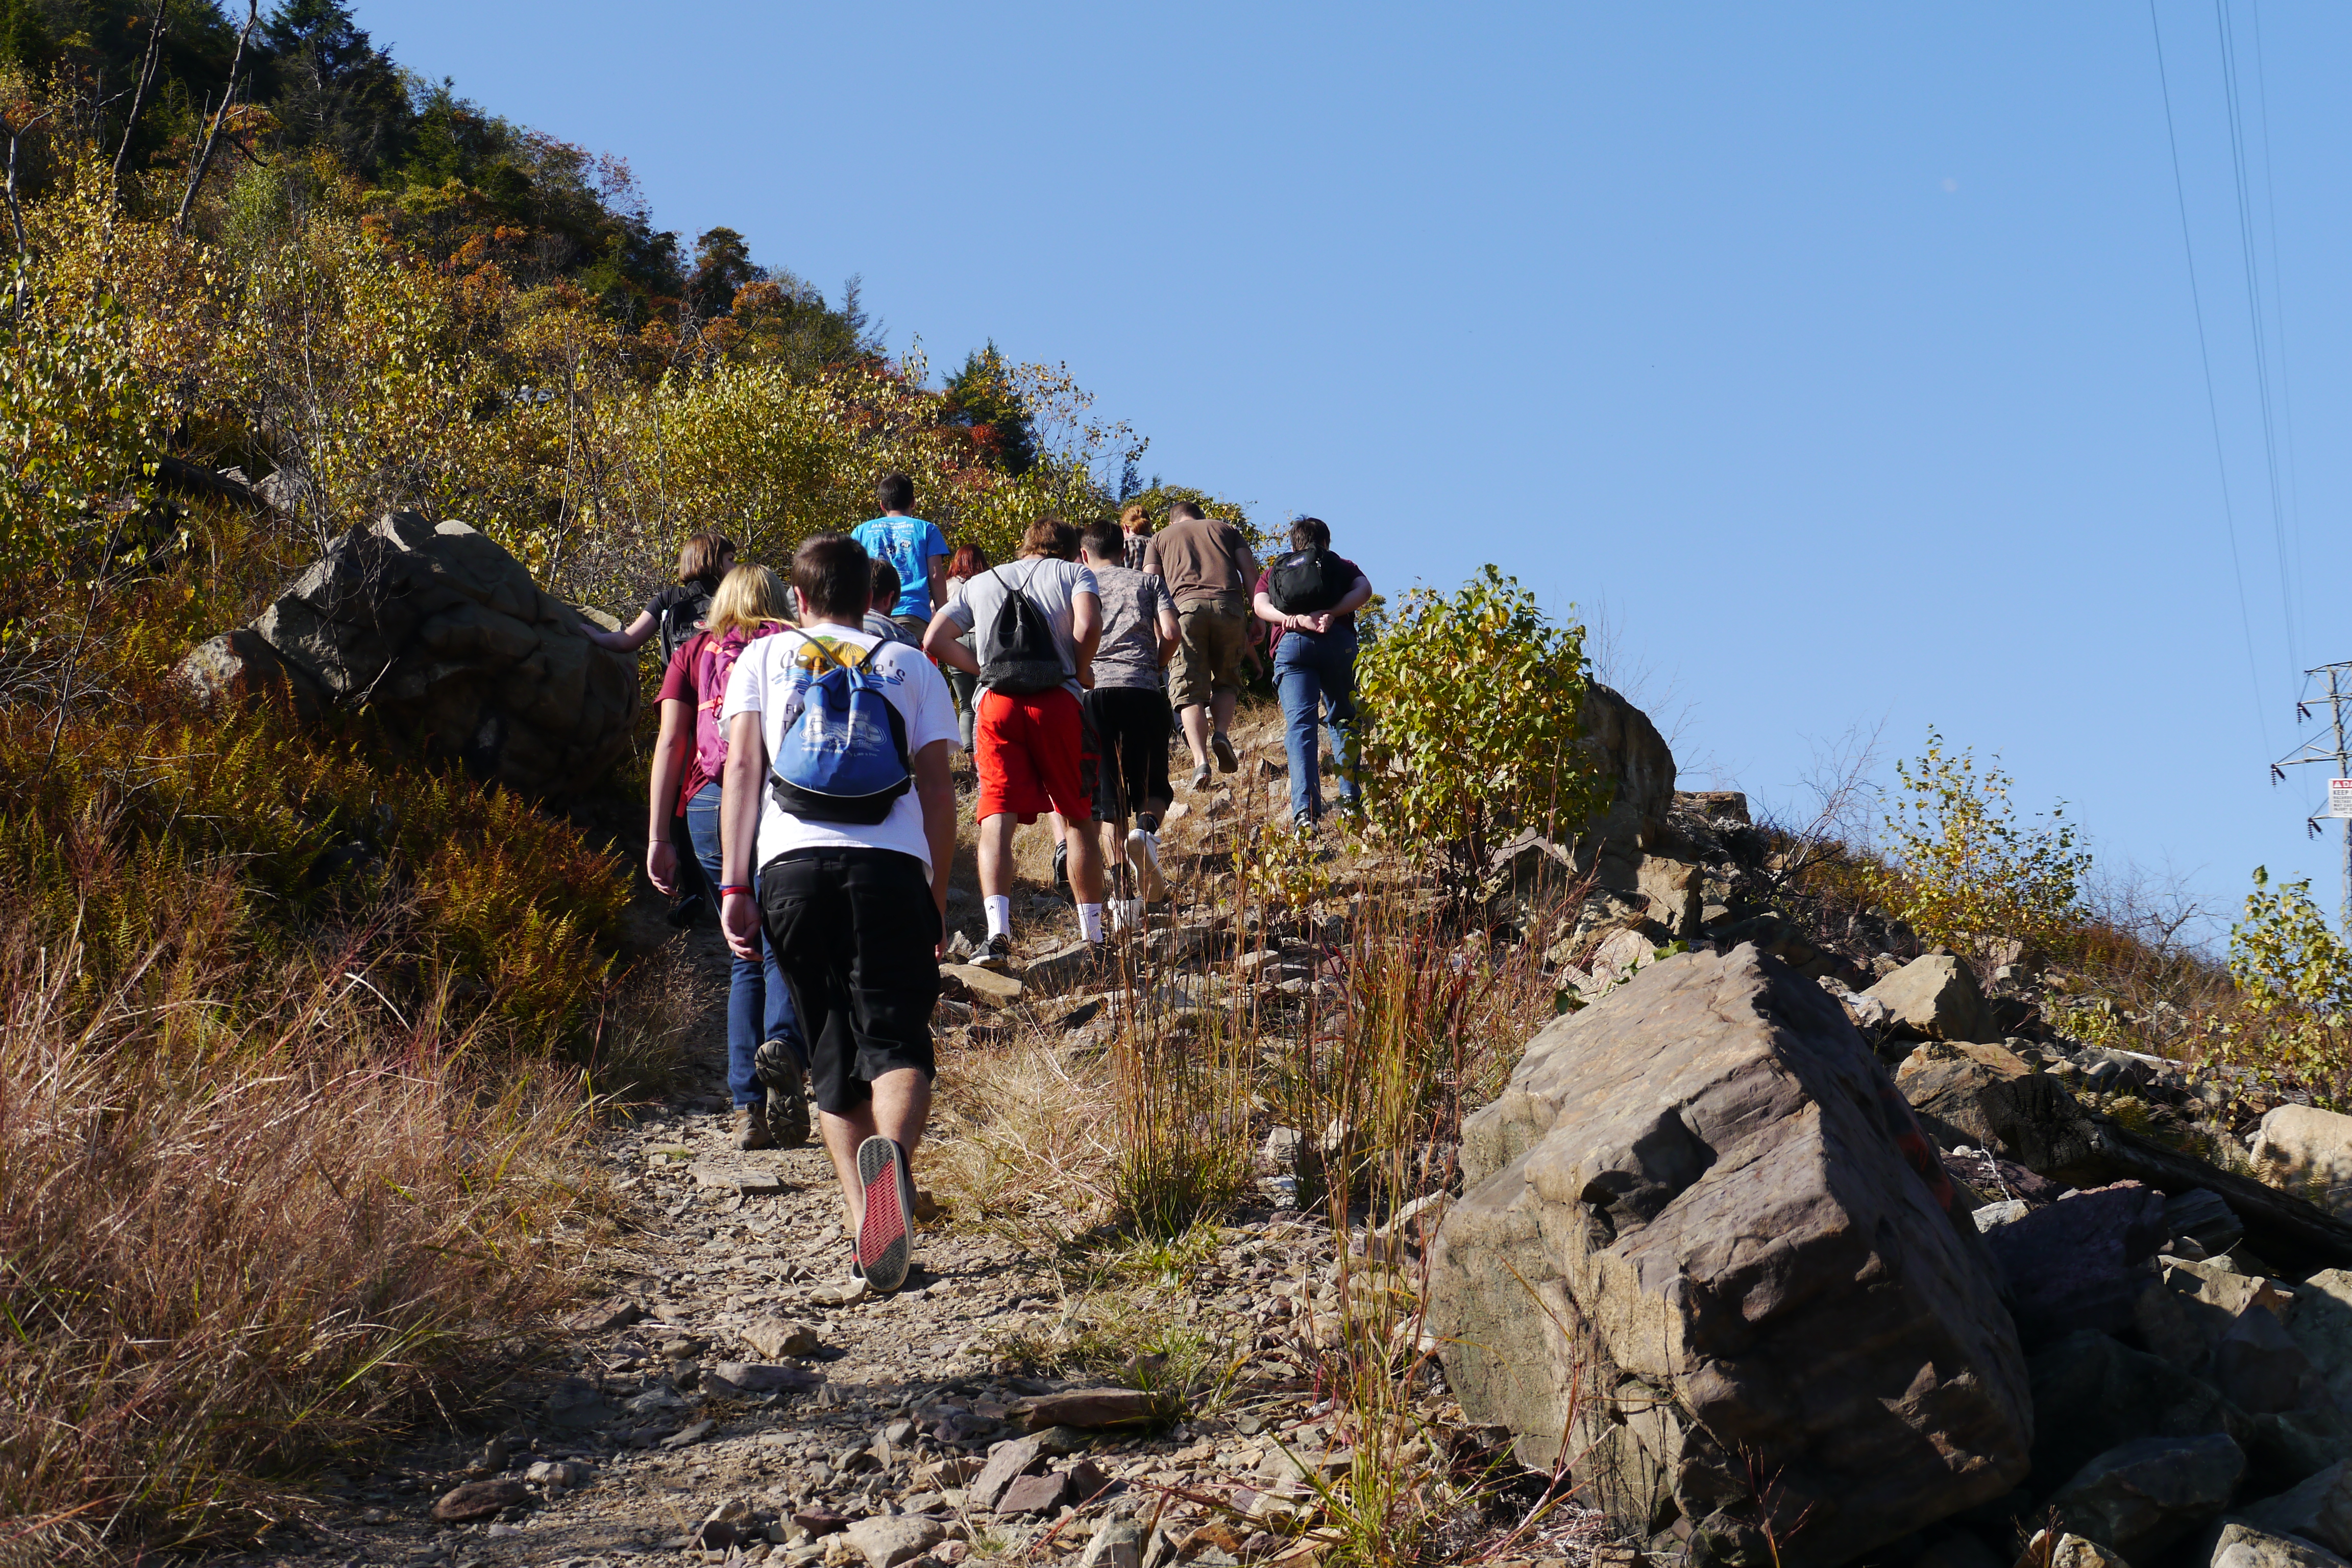 students hiking up a small footpath on the side of a grassy, rocky mountain